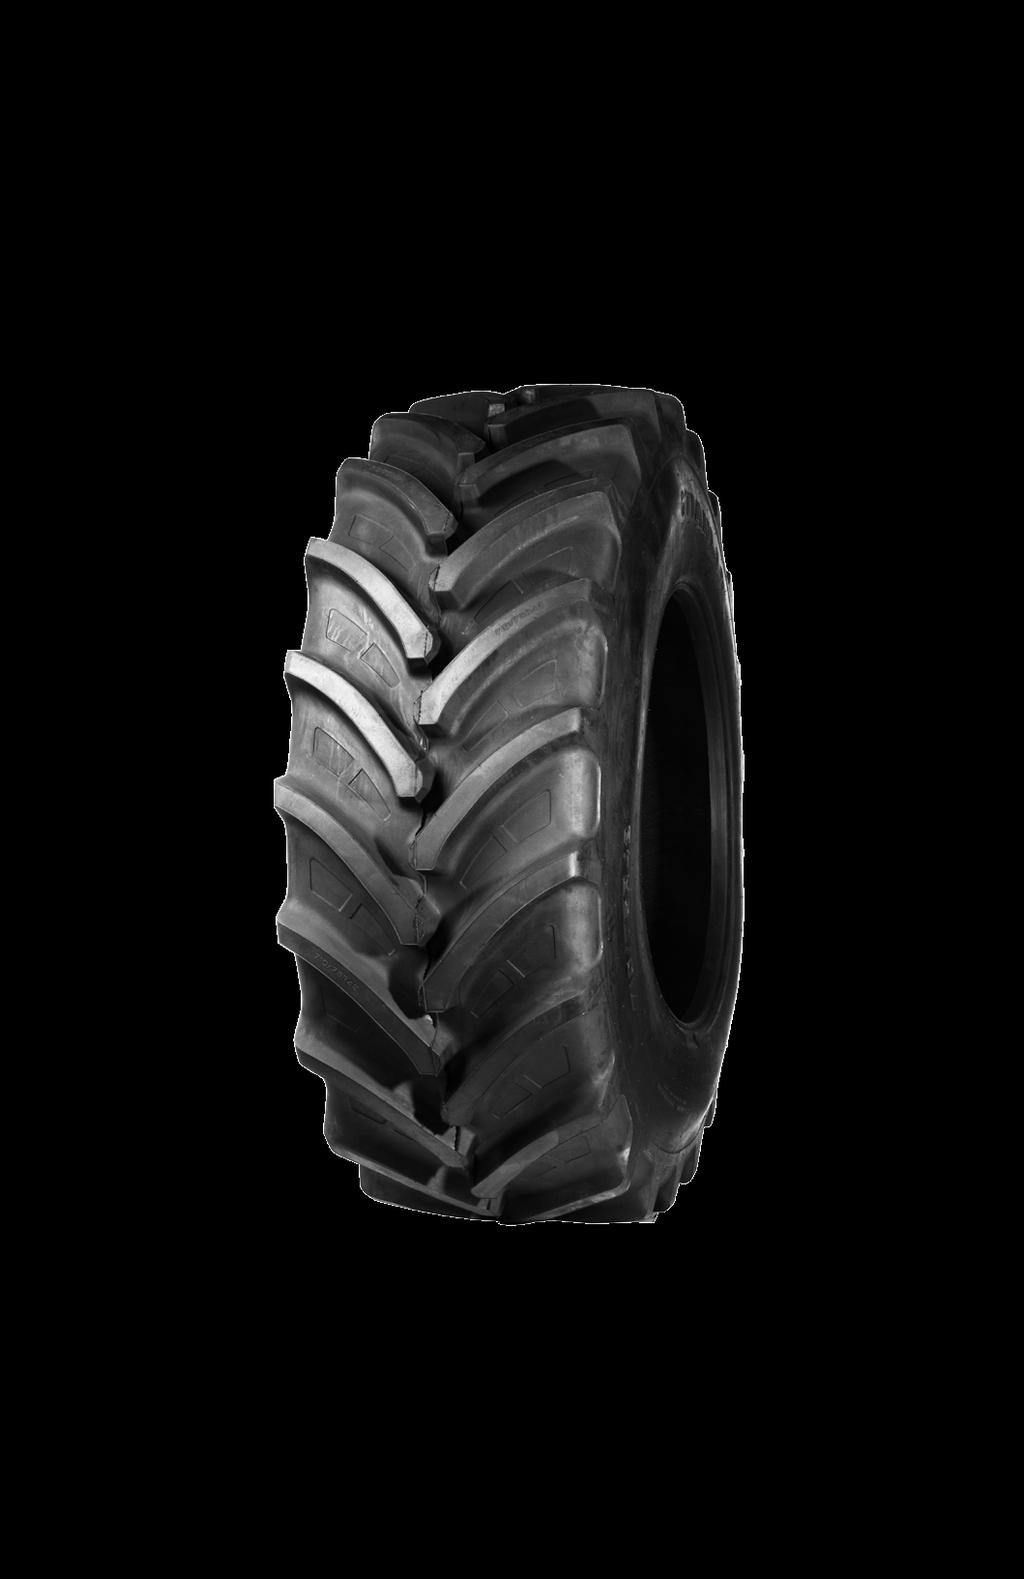 TRACTOR RADIAL R1W 65 Standard Tyres 65 Series Pattern R1W R1W Super Large Standard Tyres 75 + 85 Series Pattern R1W 65 km/h approval excellent mileage and durability more lugs in ground for enhanced